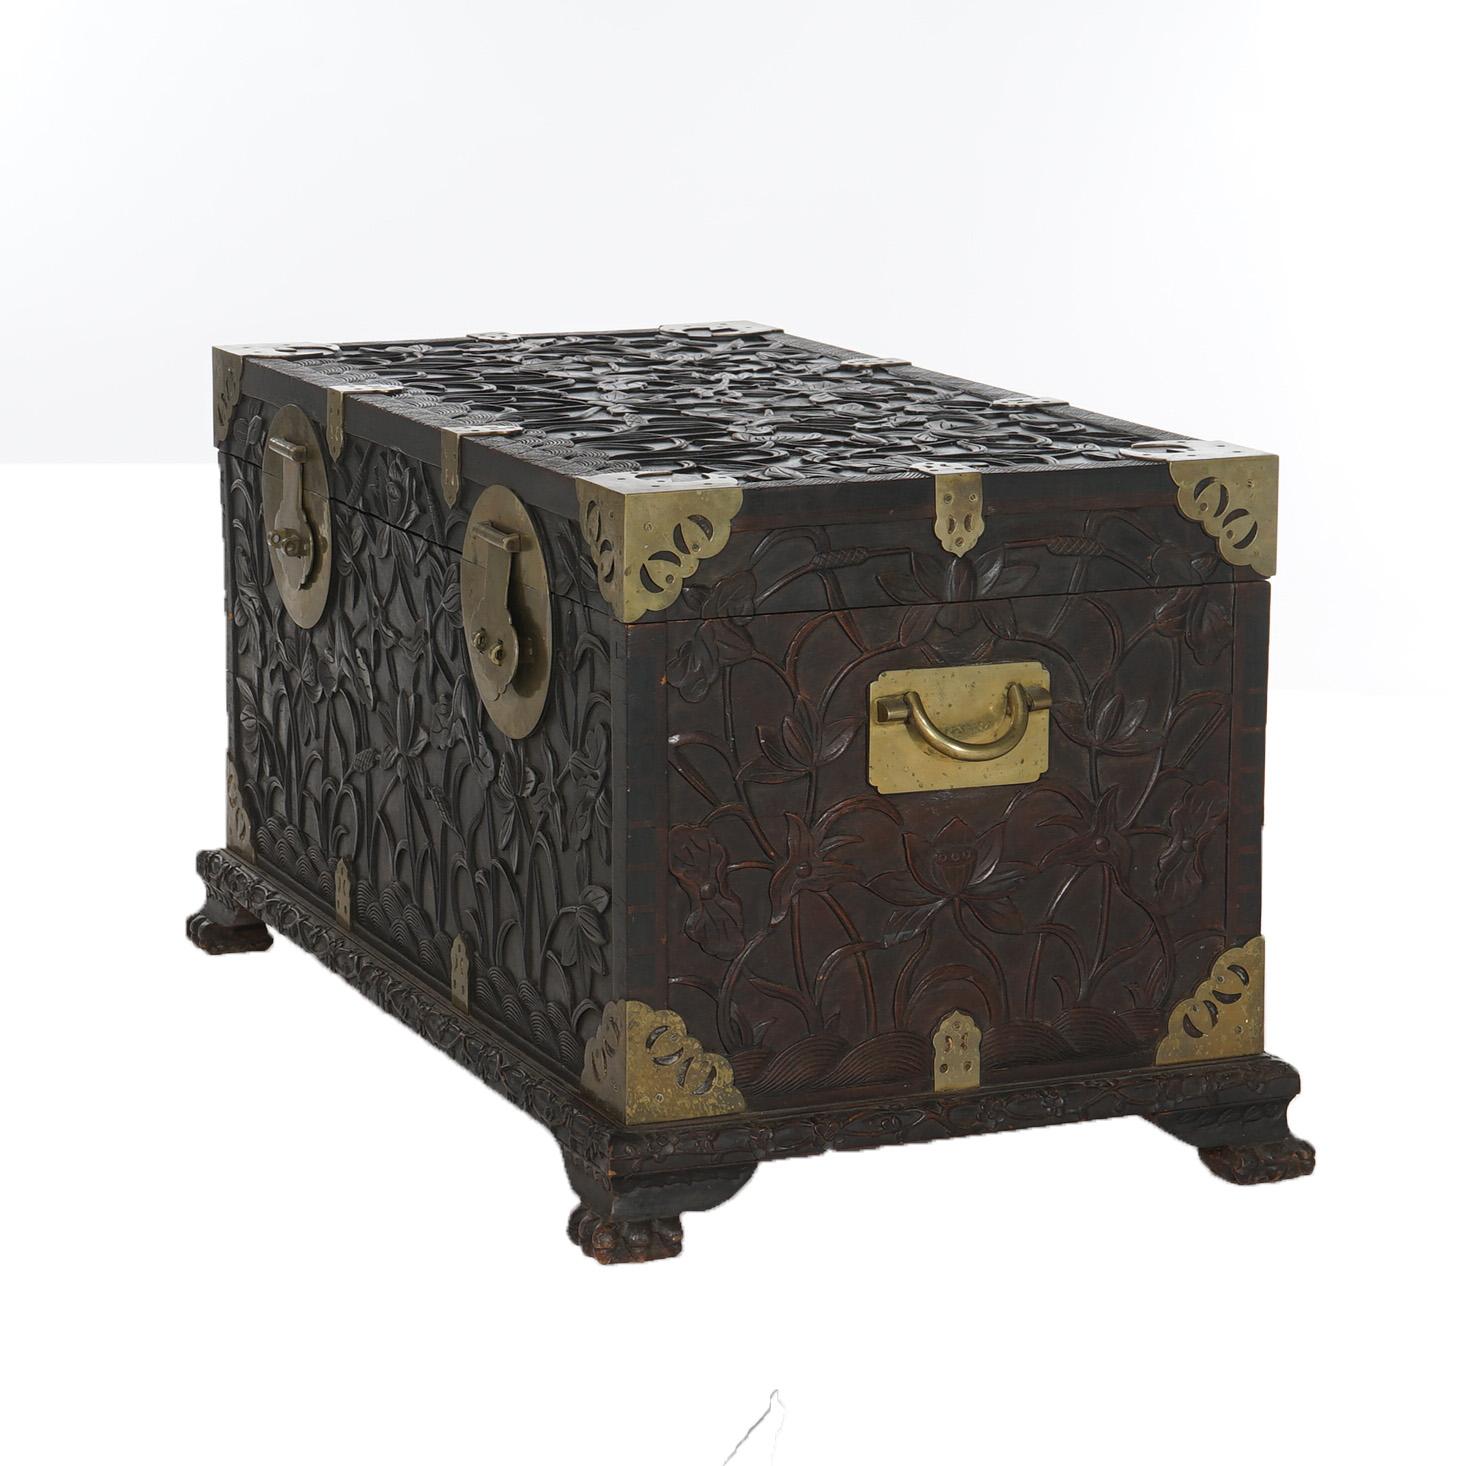 Antique Chinese Blanket Wedding Chest Carved in Relief with Floral Design C1890 For Sale 2